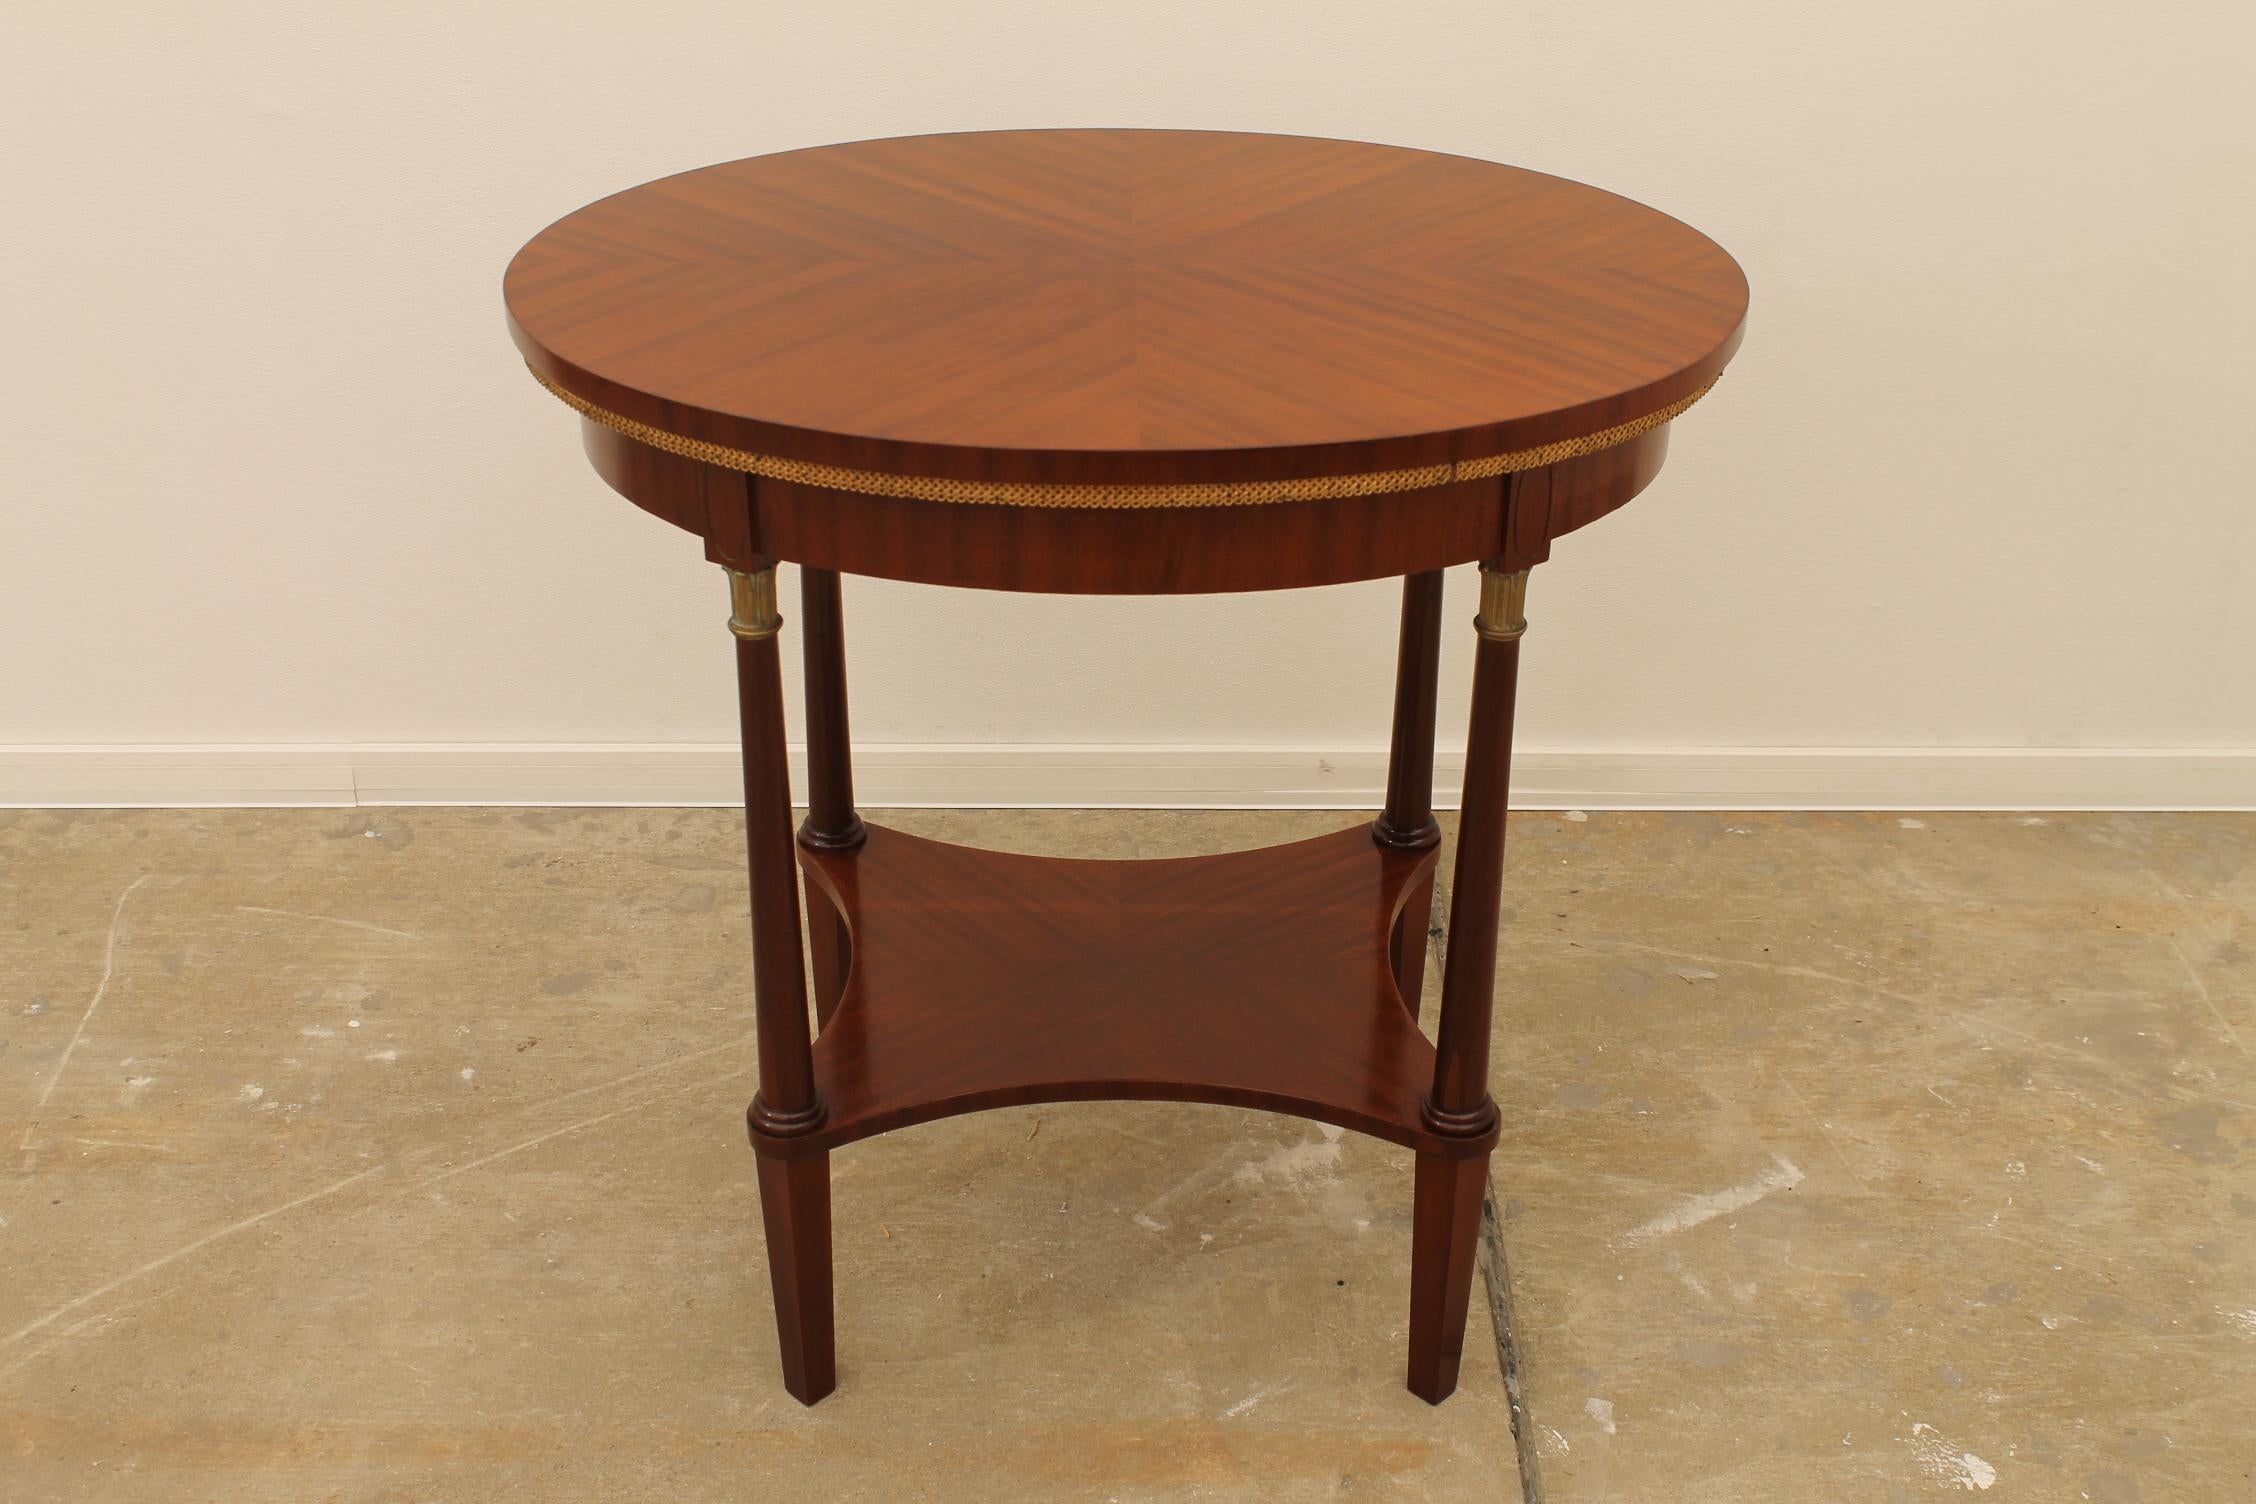 This mahogany side table was made circa in 1915. It features elements and shapes including gilded decorative motifs typical of the Art Nouveau period. It was manufactured in Austria-Hungary. It´s made of solid wood with mahogany veneer.
The table